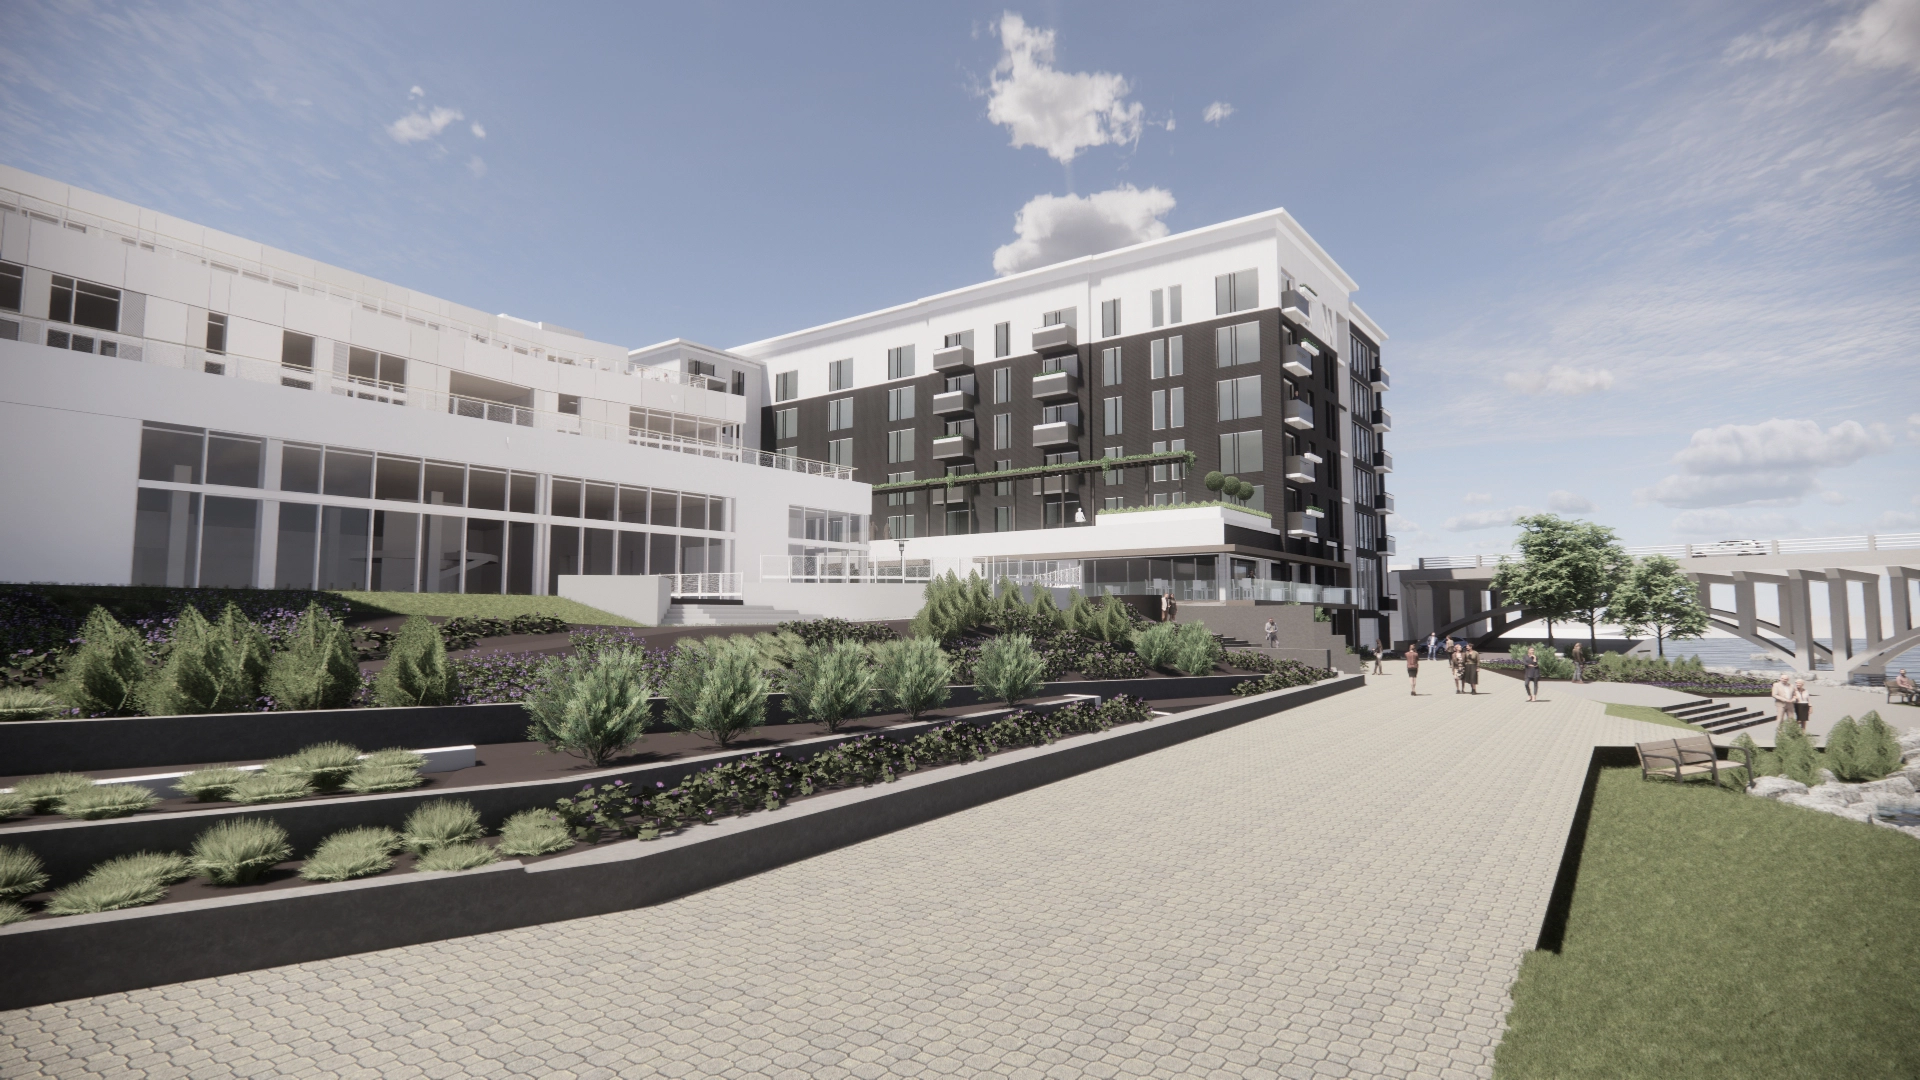 Exterior rendering of Library Lofts Development on the Rock River in downtown Rockford